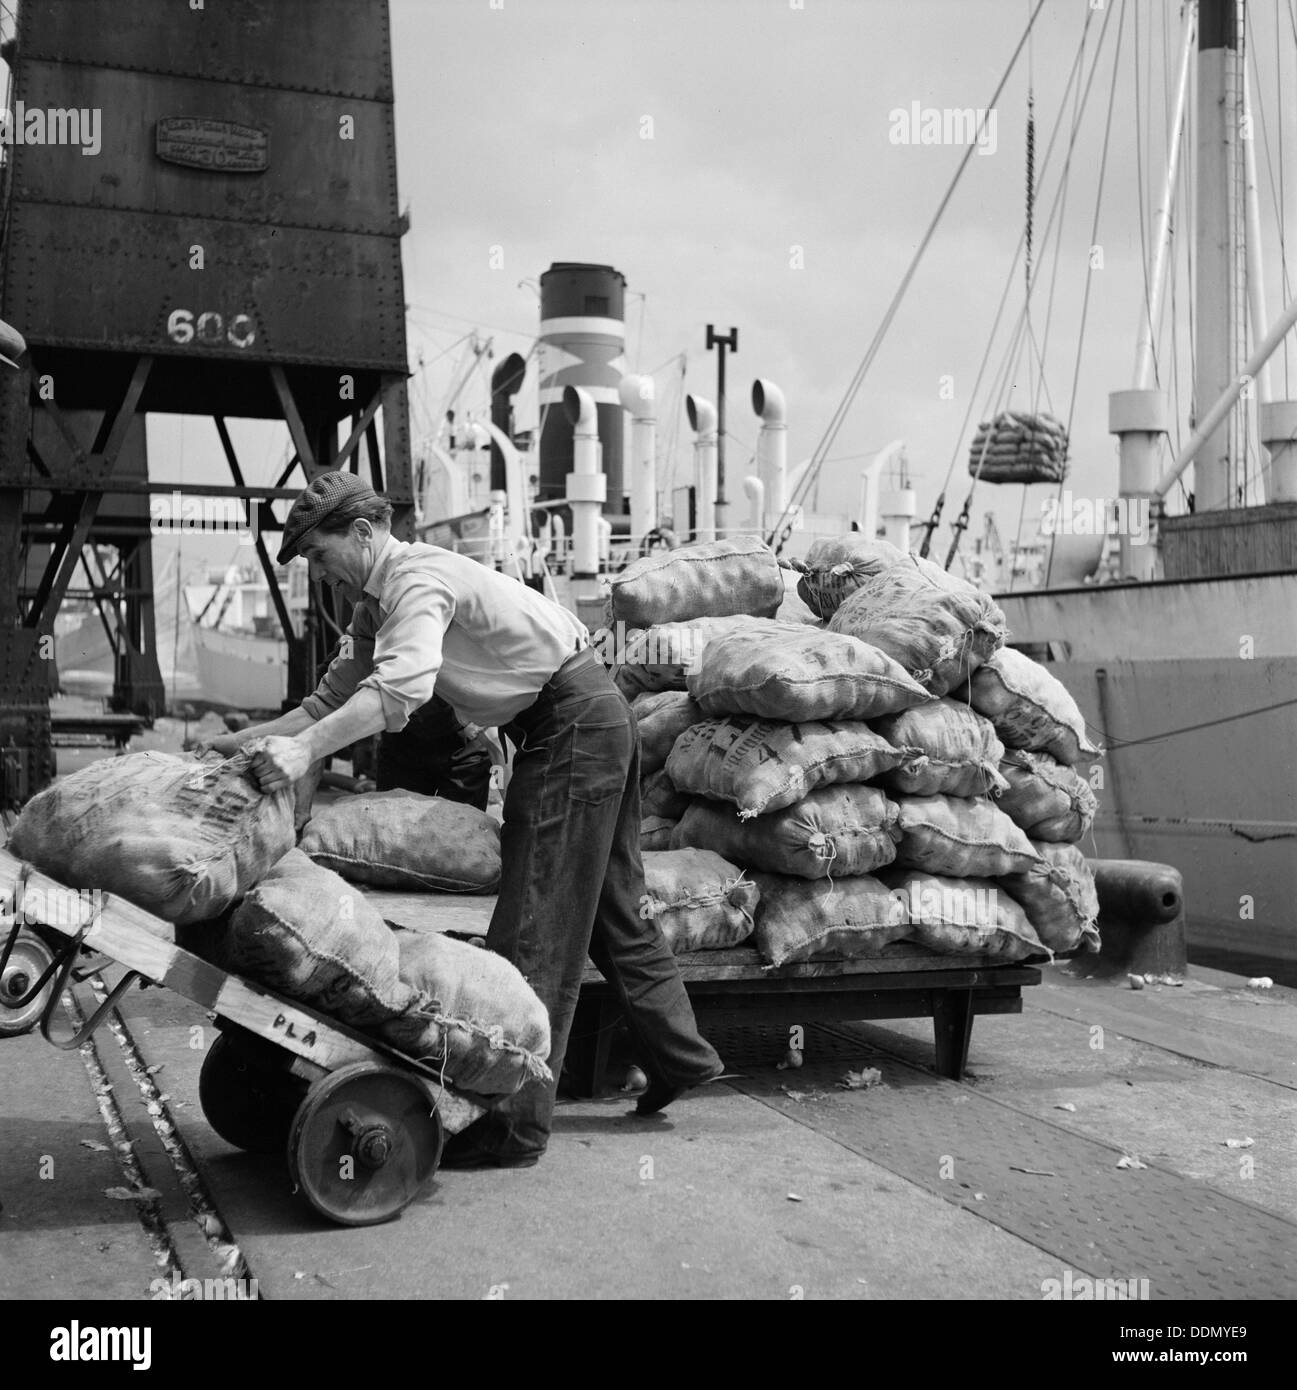 Sacks of vegetables being loaded onto a ship in London docks, c1945-c1965. Artist: SW Rawlings Stock Photo